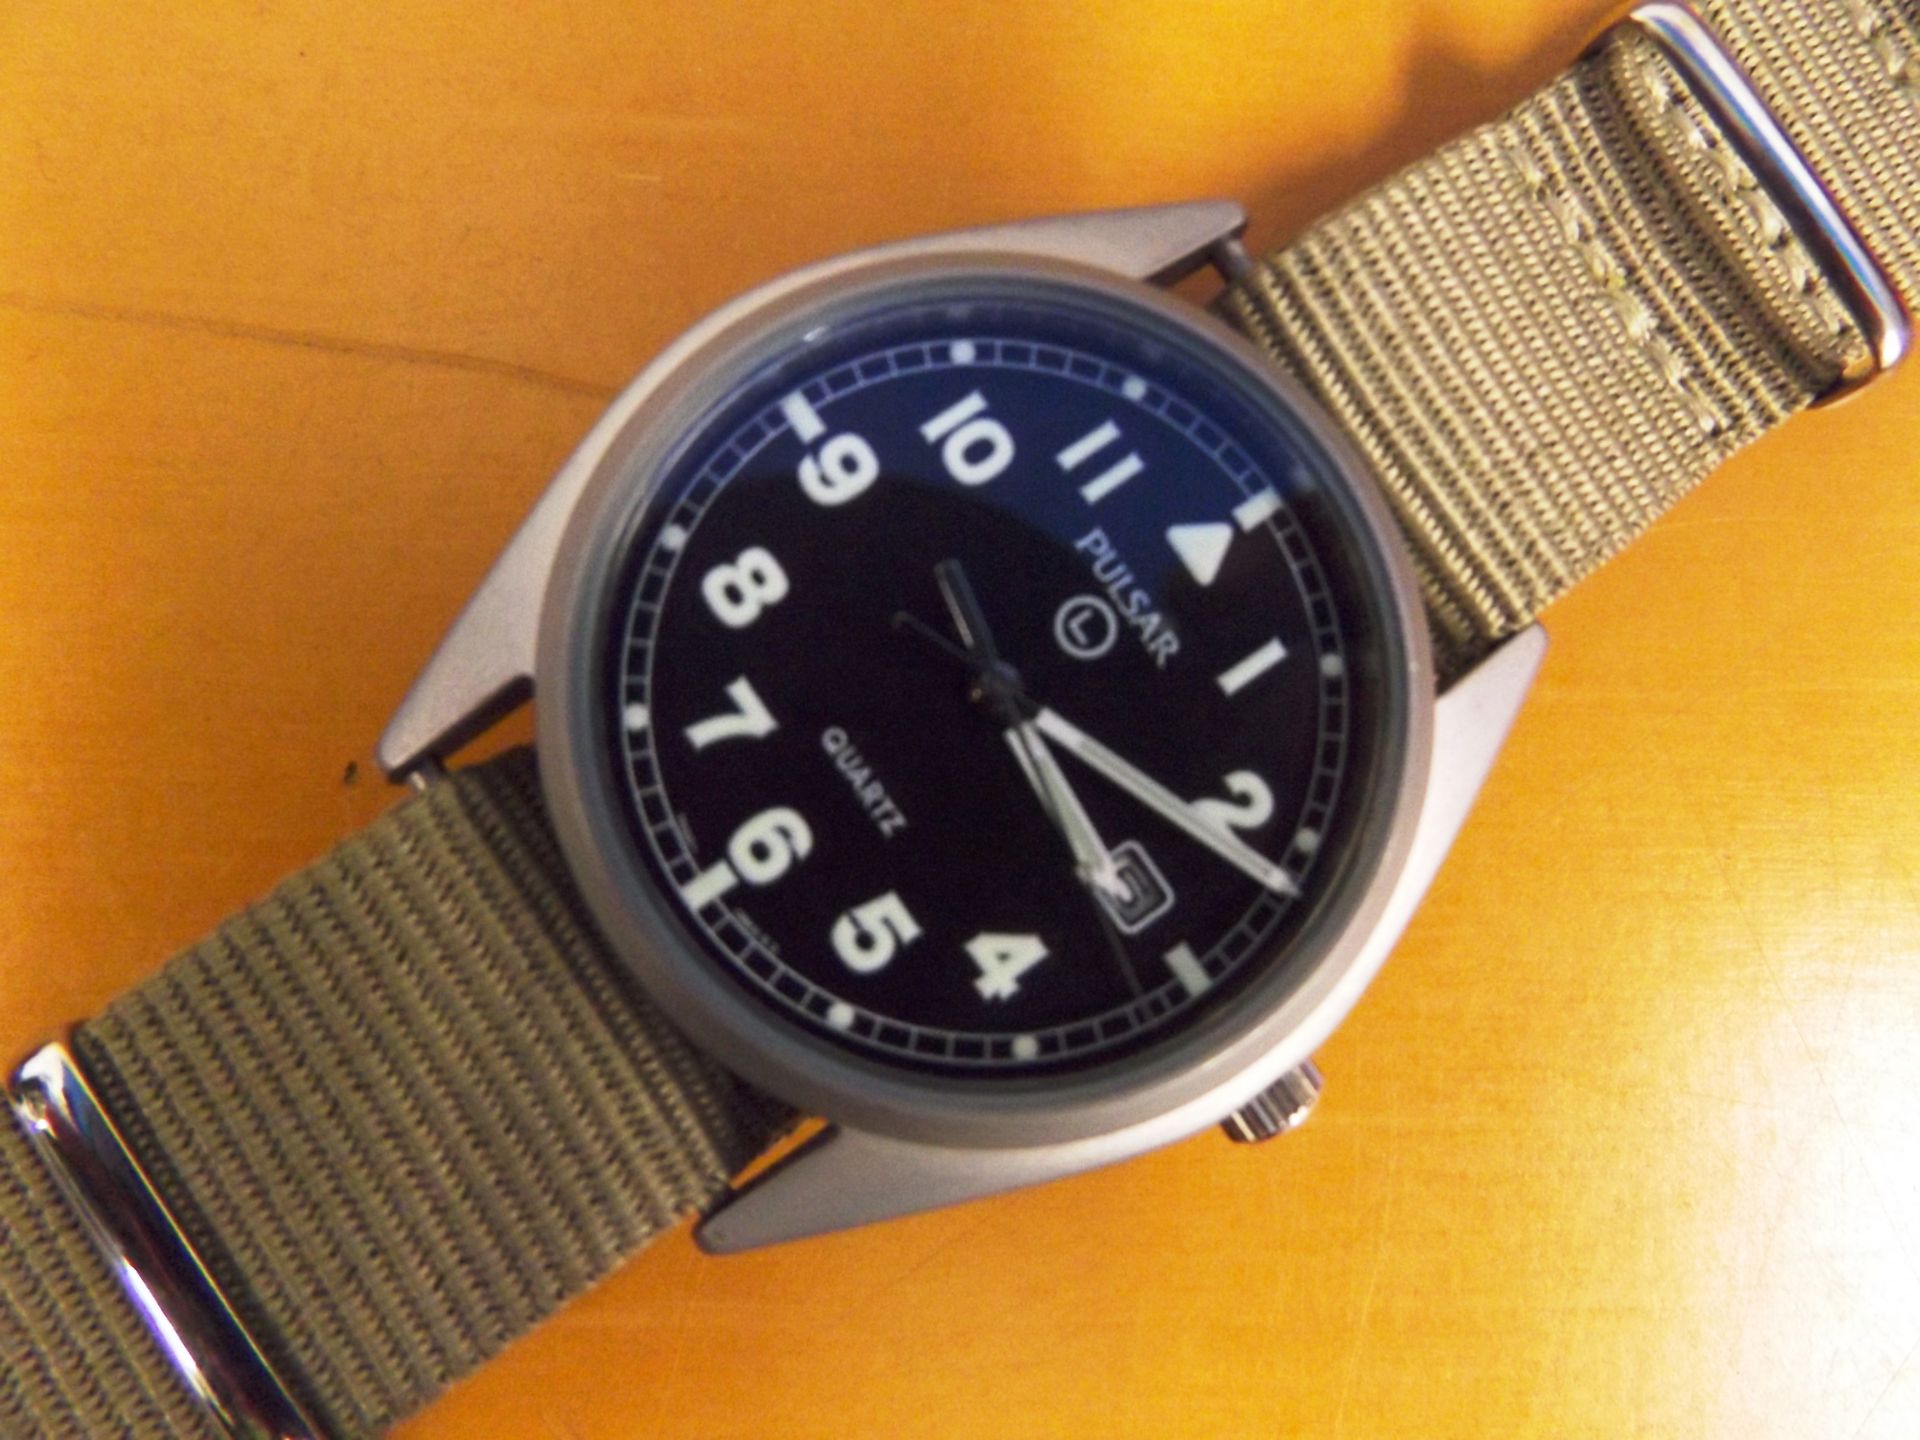 Unissued Pulsar G10 wrist watch - Afghan Issue - Image 2 of 7